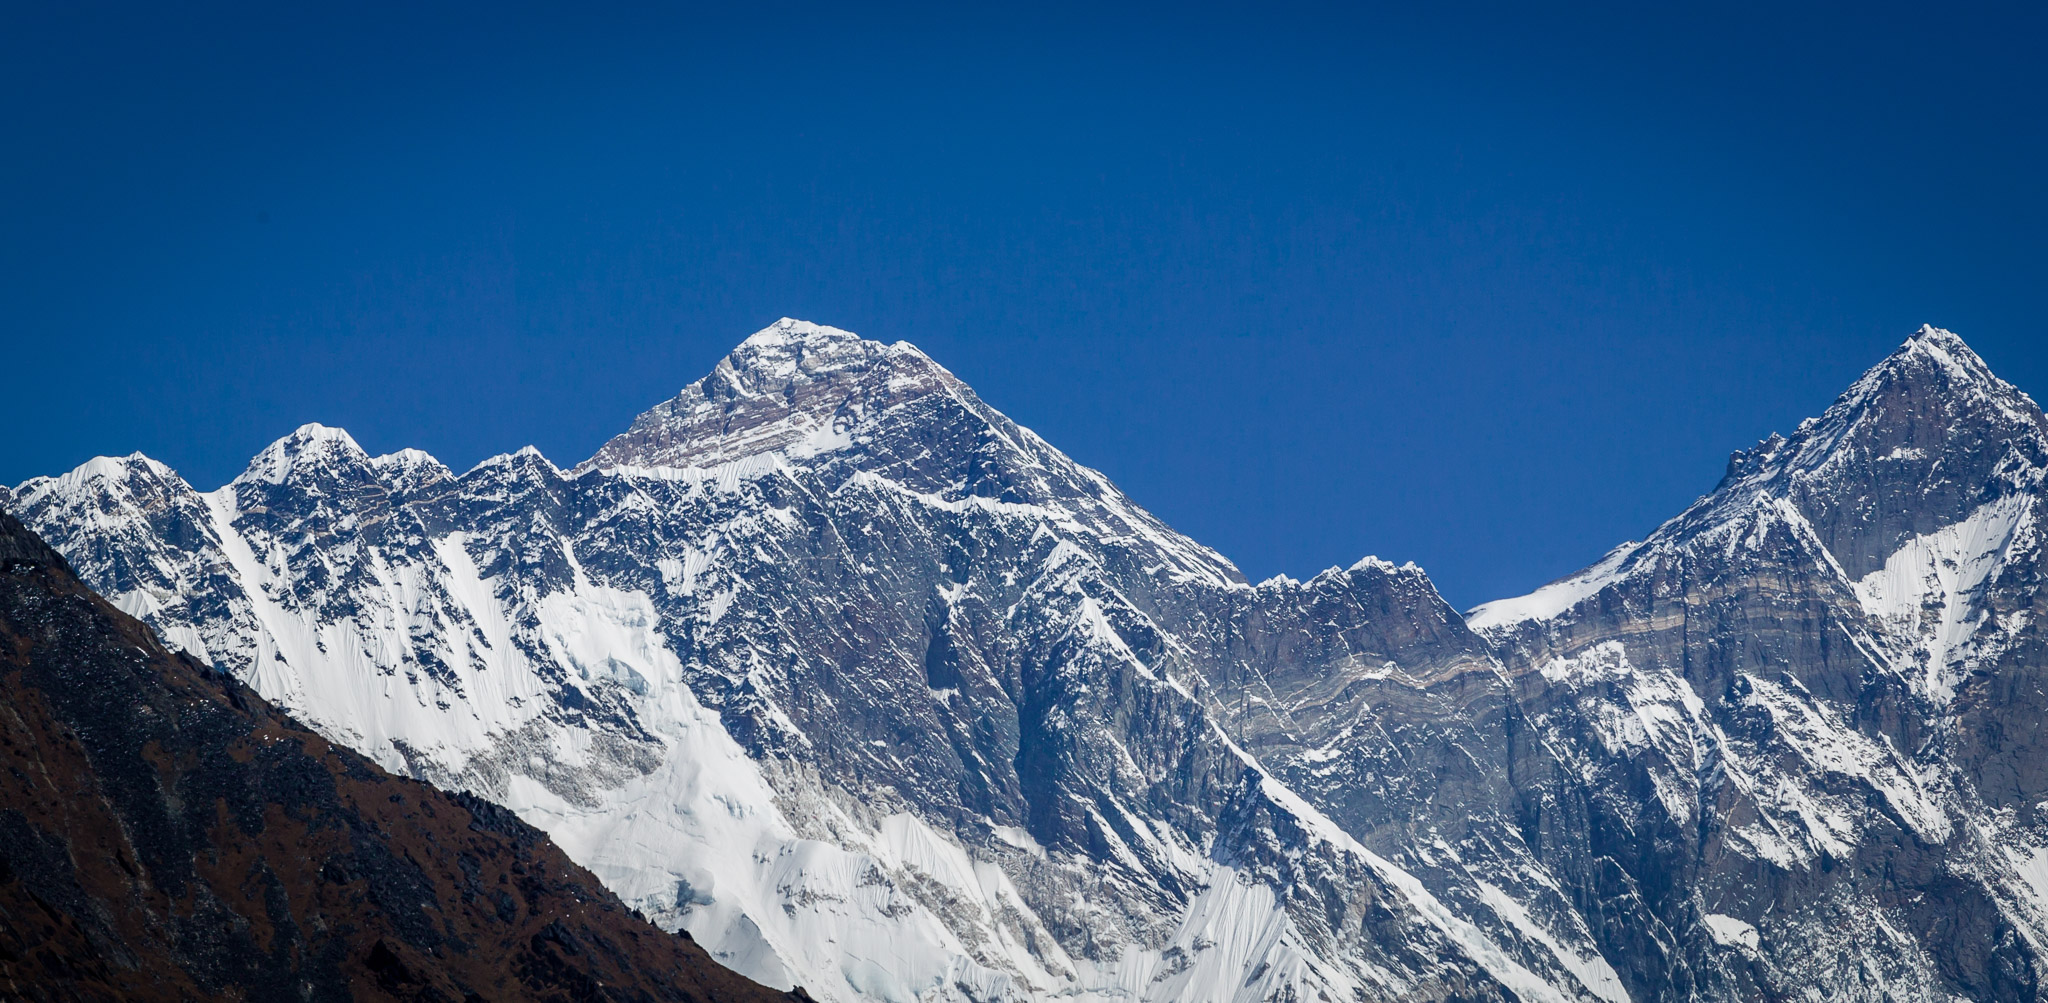 Everest from the Everest View Hotel